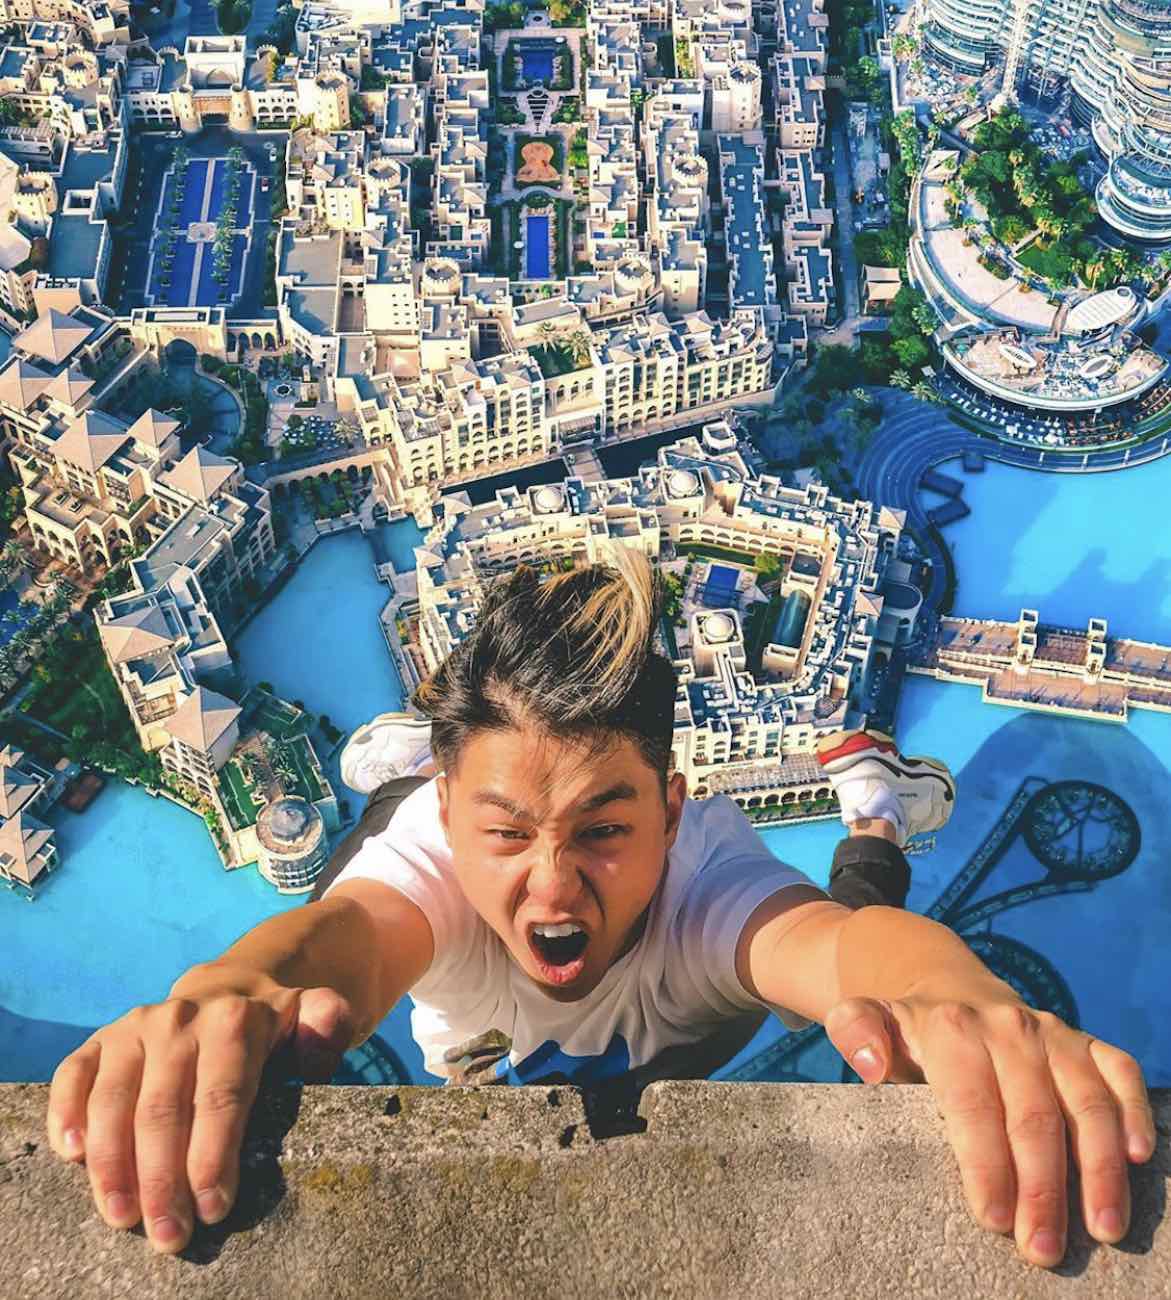 Social media star Zhong is notorious for hosting hilarious, crazy, and wild videos. Here's why Zhong should be your next YouTuber obsession.